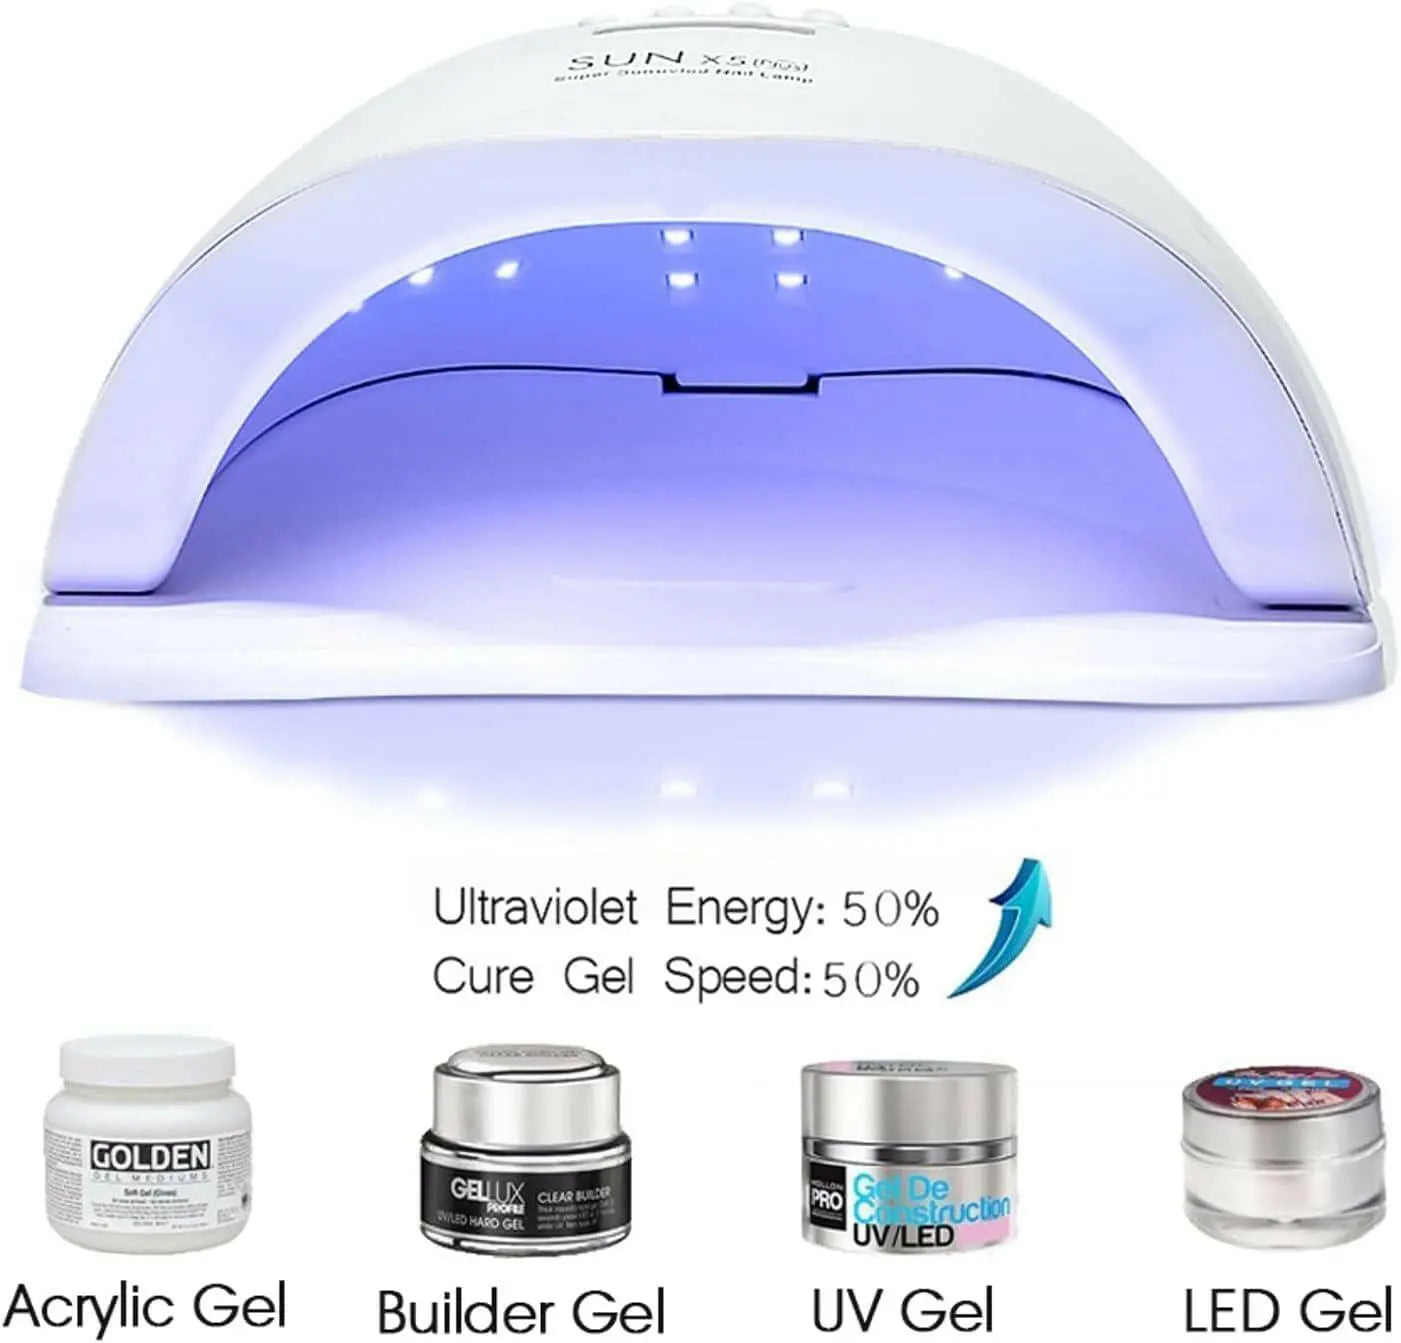 SKY-TOUCH Professional Gel Polish Led Nail Drying Lamp,Nail Dryer Sun X5 PlUS 54W Uv Led Nail Lamp For Professional Manicure Salon,Nails, Polish, Curing, Manicure, Pedicure,Nail Arts Tools, White